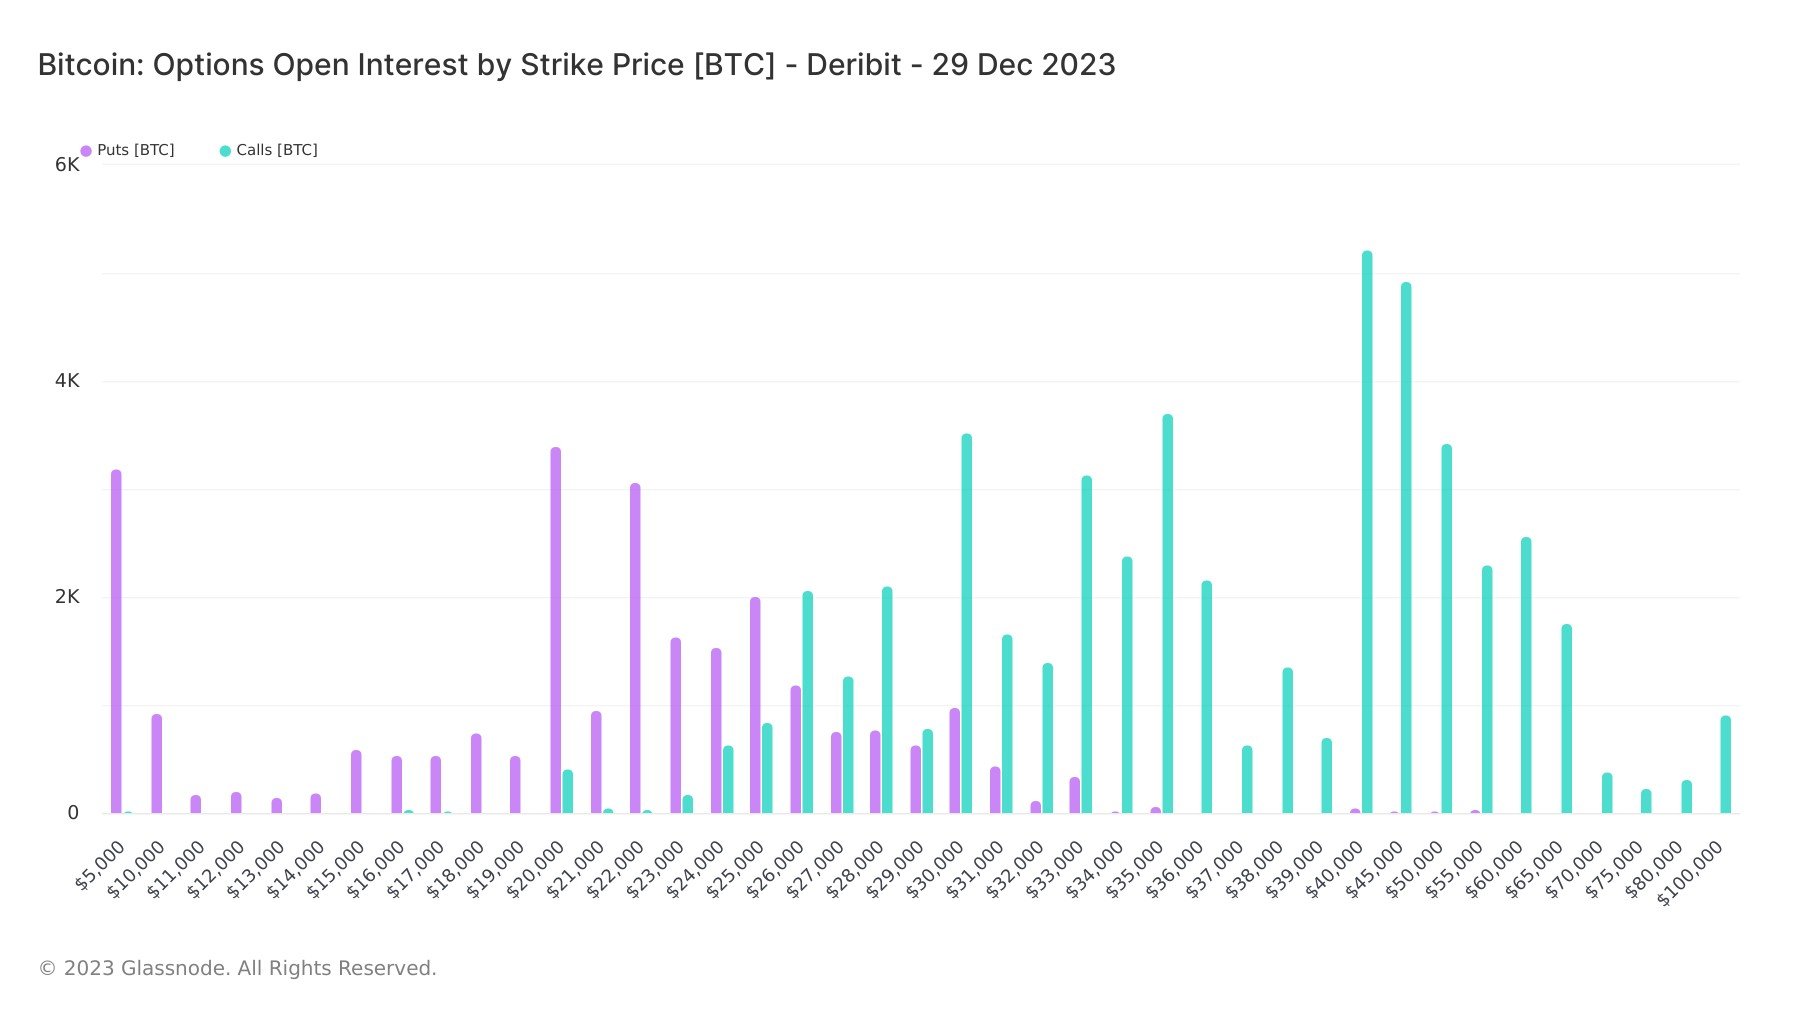 Options Open Interest by strike price: (Source: Glassnode)